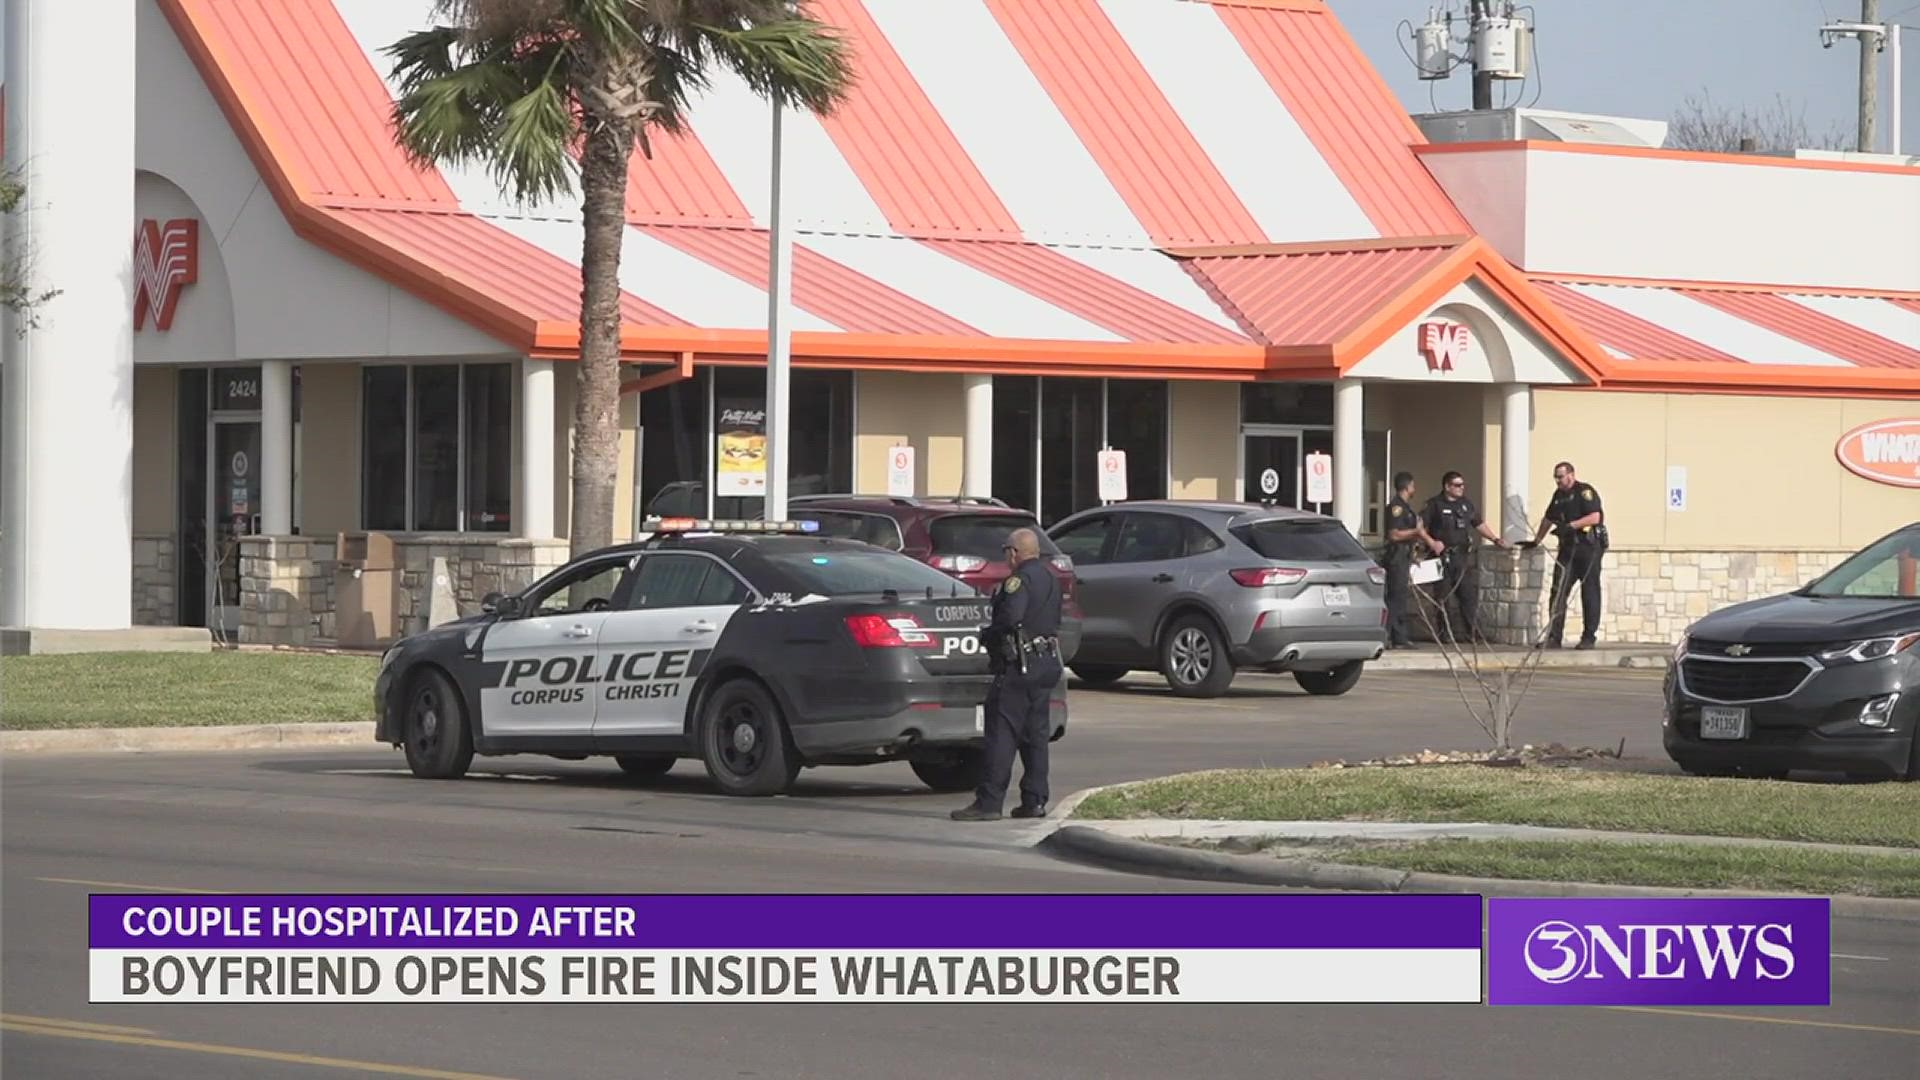 The incident happened at the Whataburger on Baldwin early Tuesday morning.